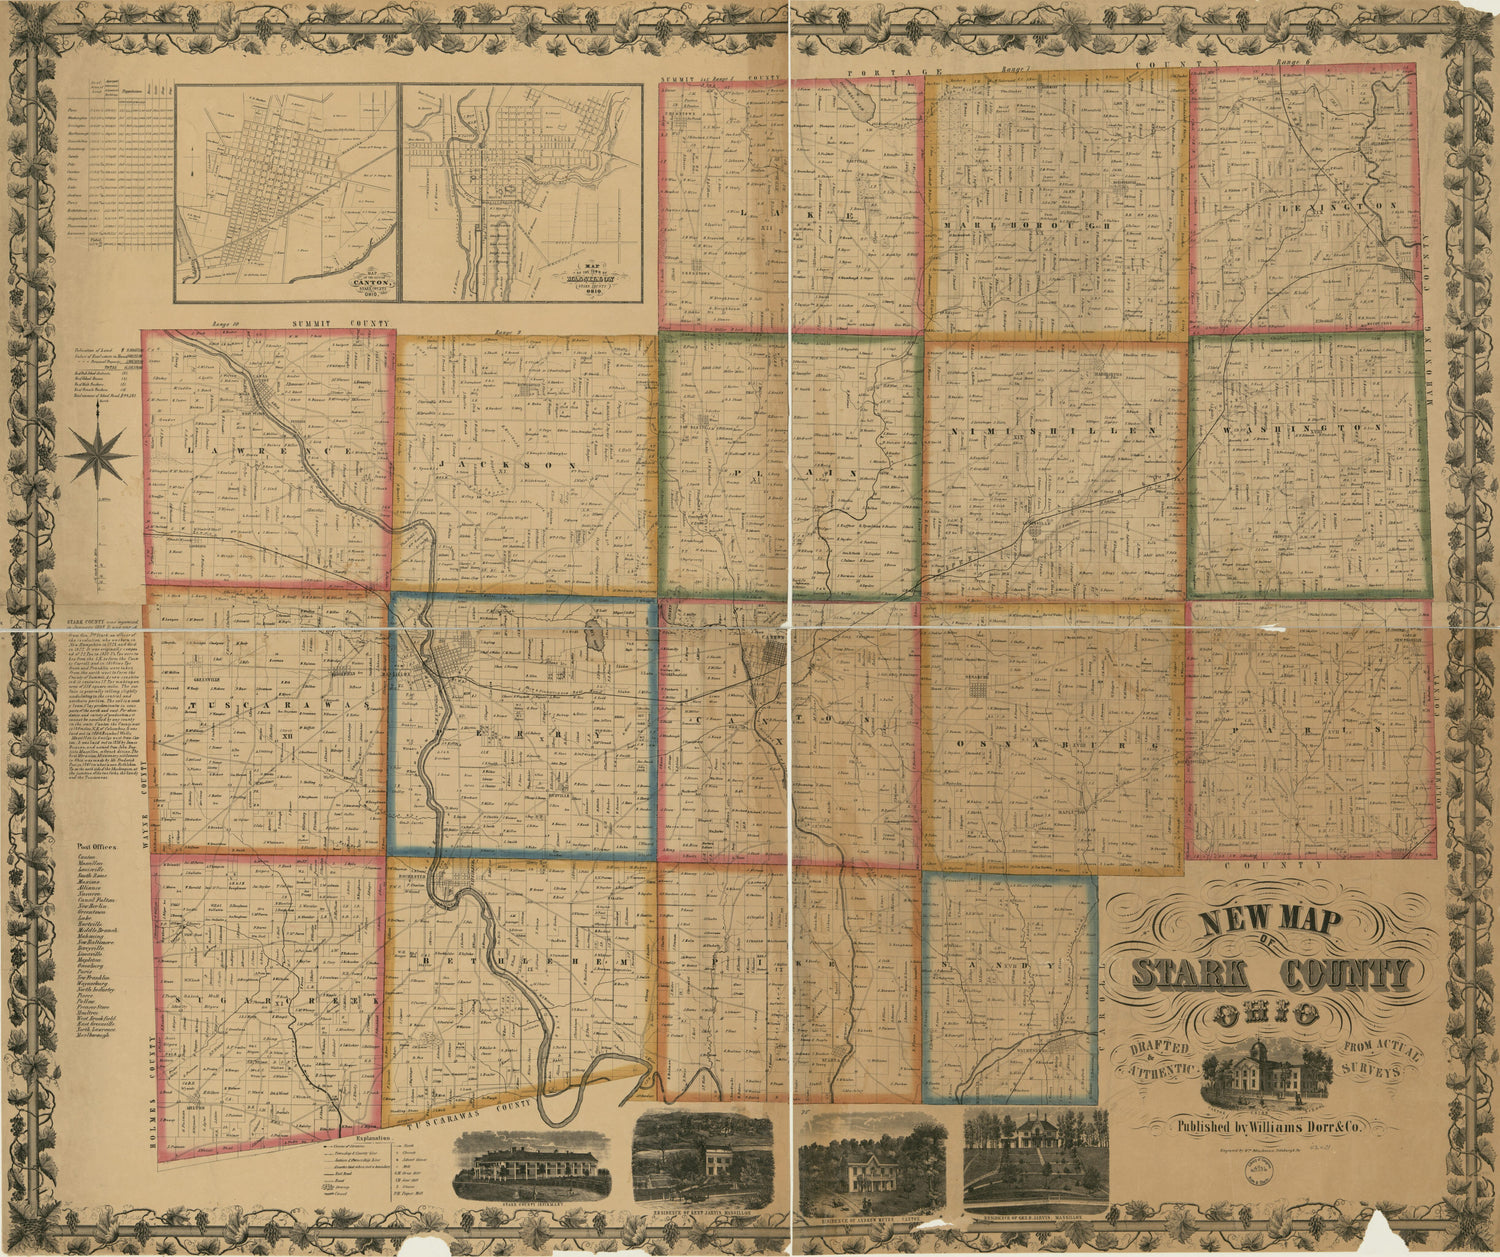 This old map of New Map of Stark County, Ohio from 1850 was created by William Schuchman in 1850